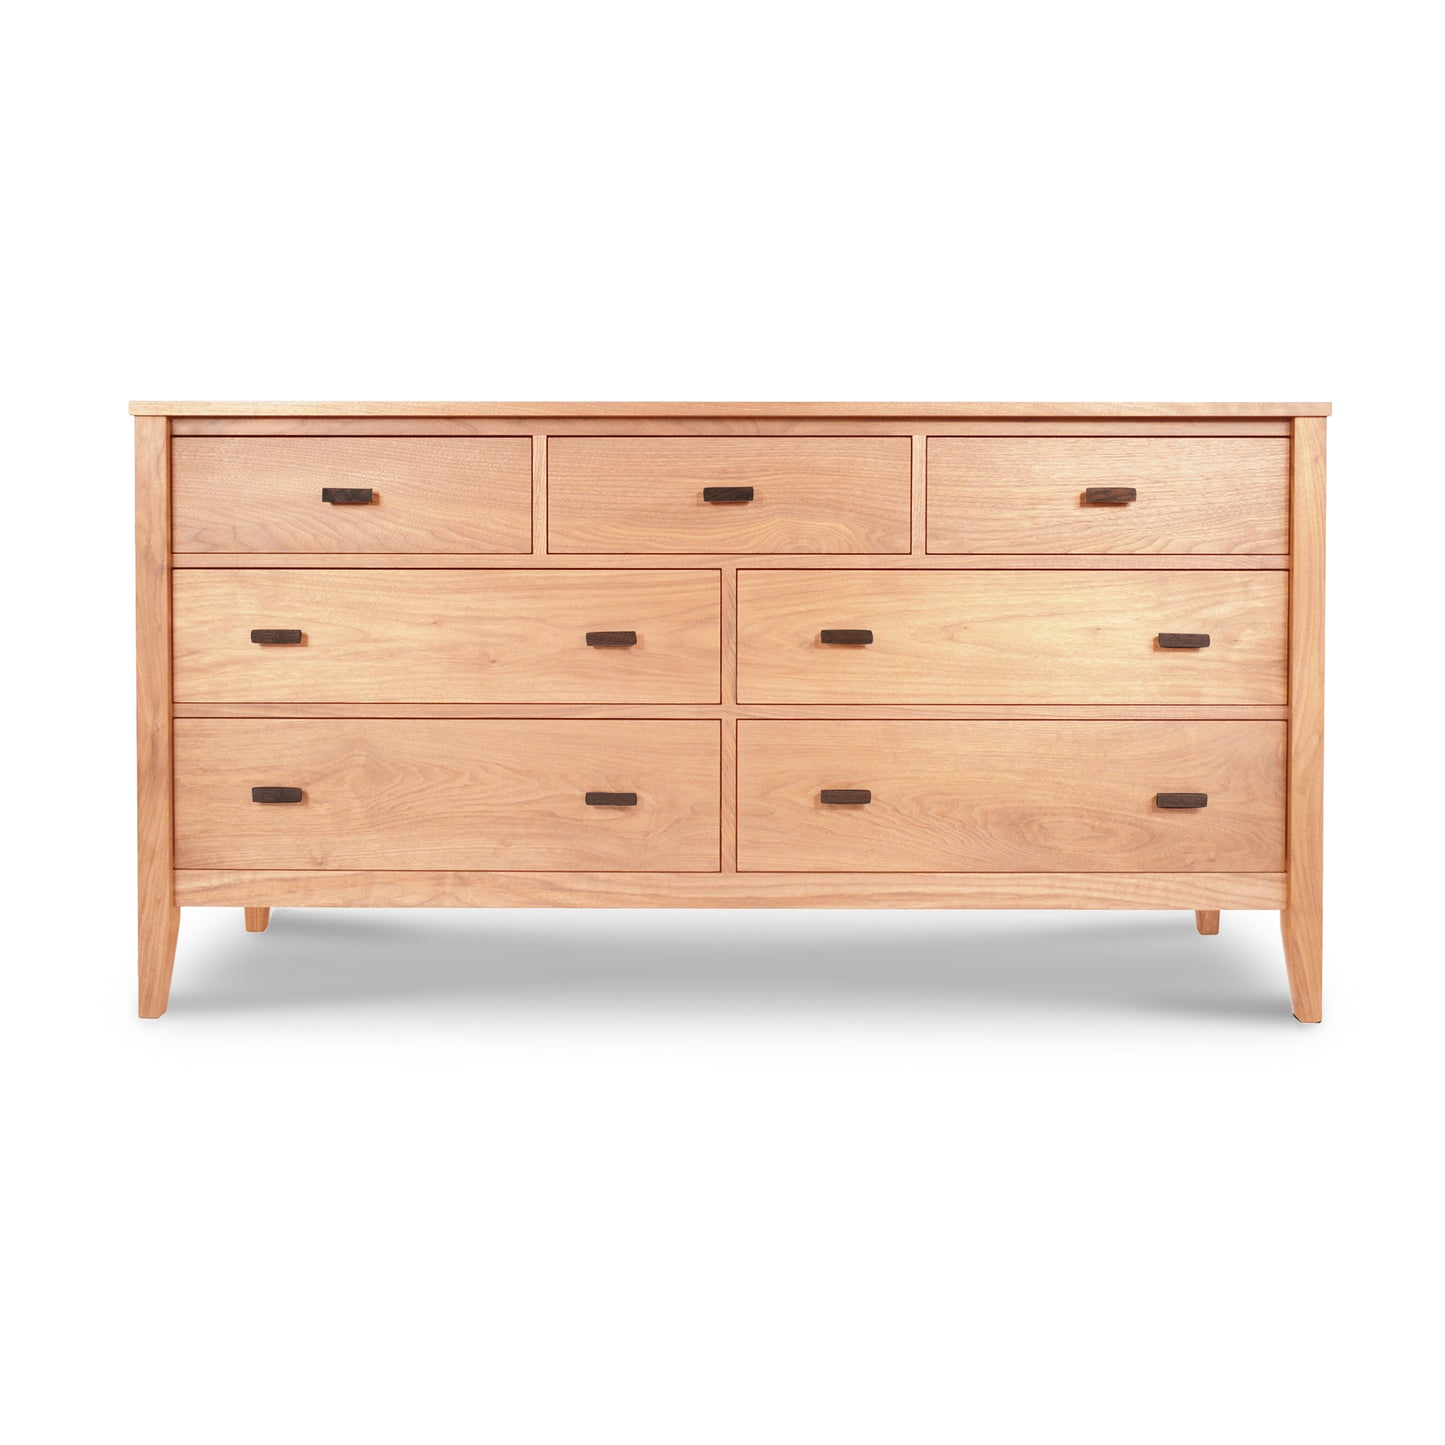 The Maple Corner Woodworks Andover Modern 7-Drawer Dresser seamlessly combines traditional flair and modern design. Made of high-quality wood, this dresser features multiple spacious drawers for ample storage. Its sleek white background